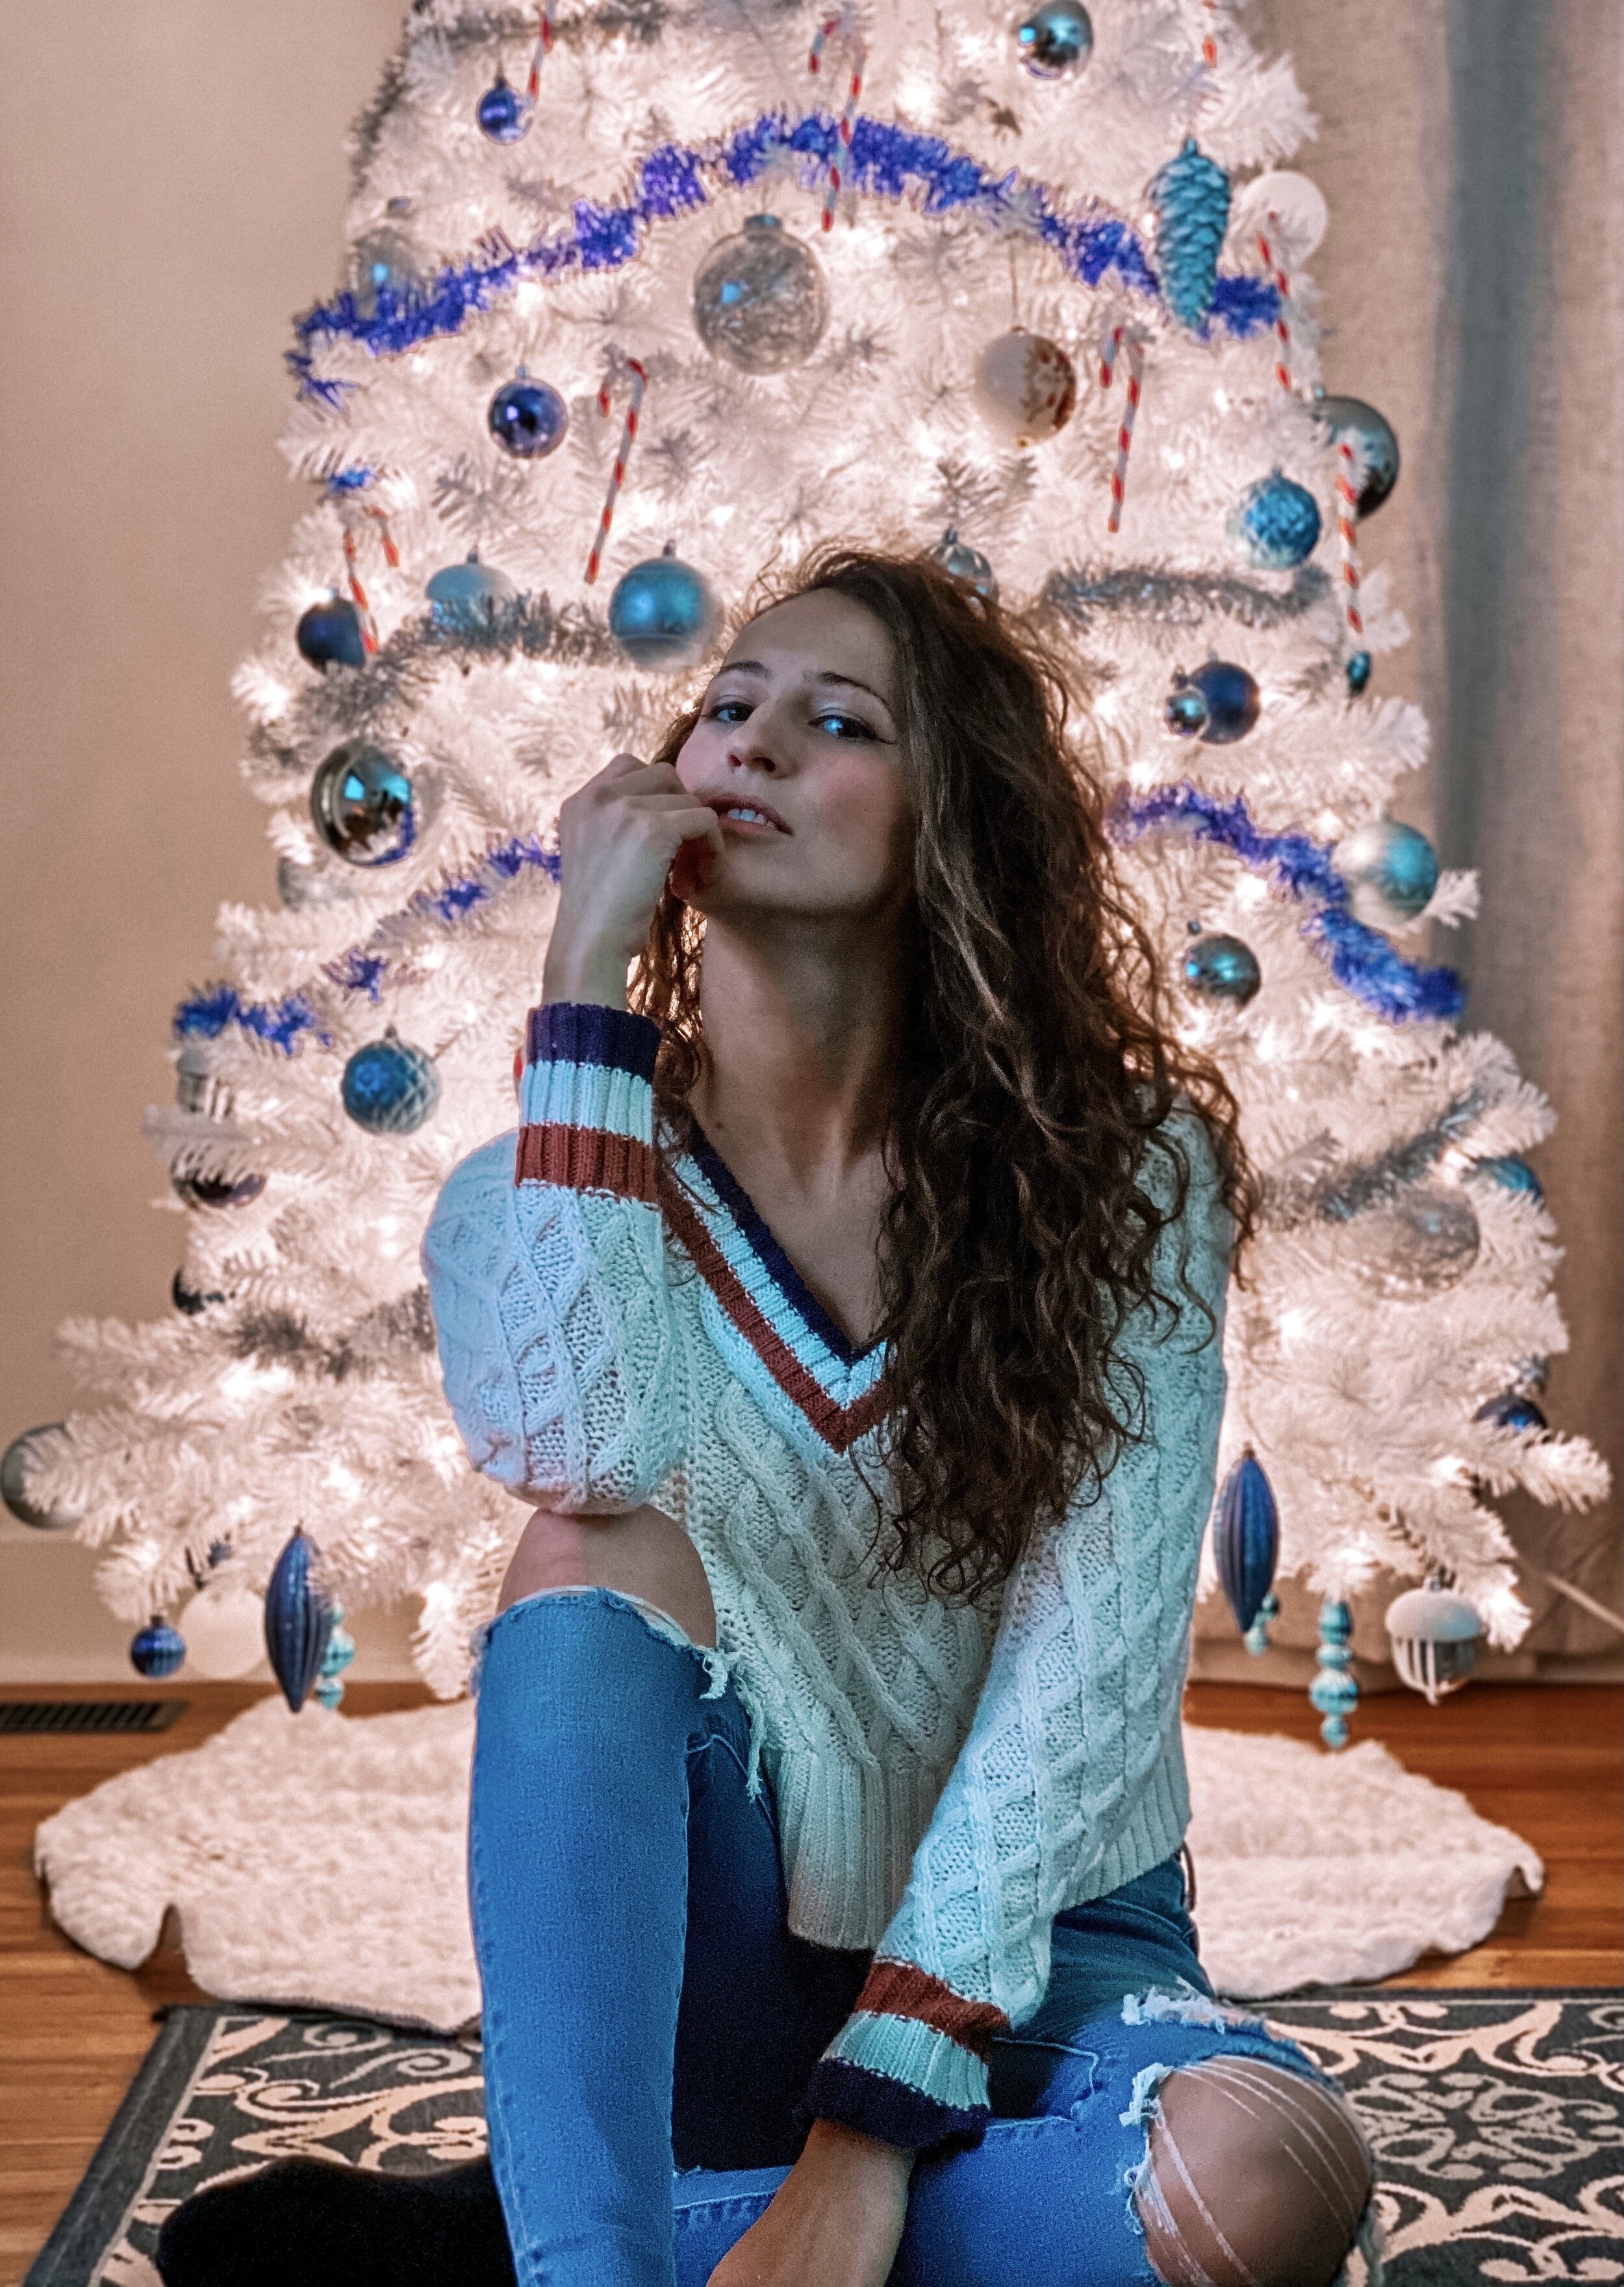 5 Christmas Posing Ideas for Instagram From Home